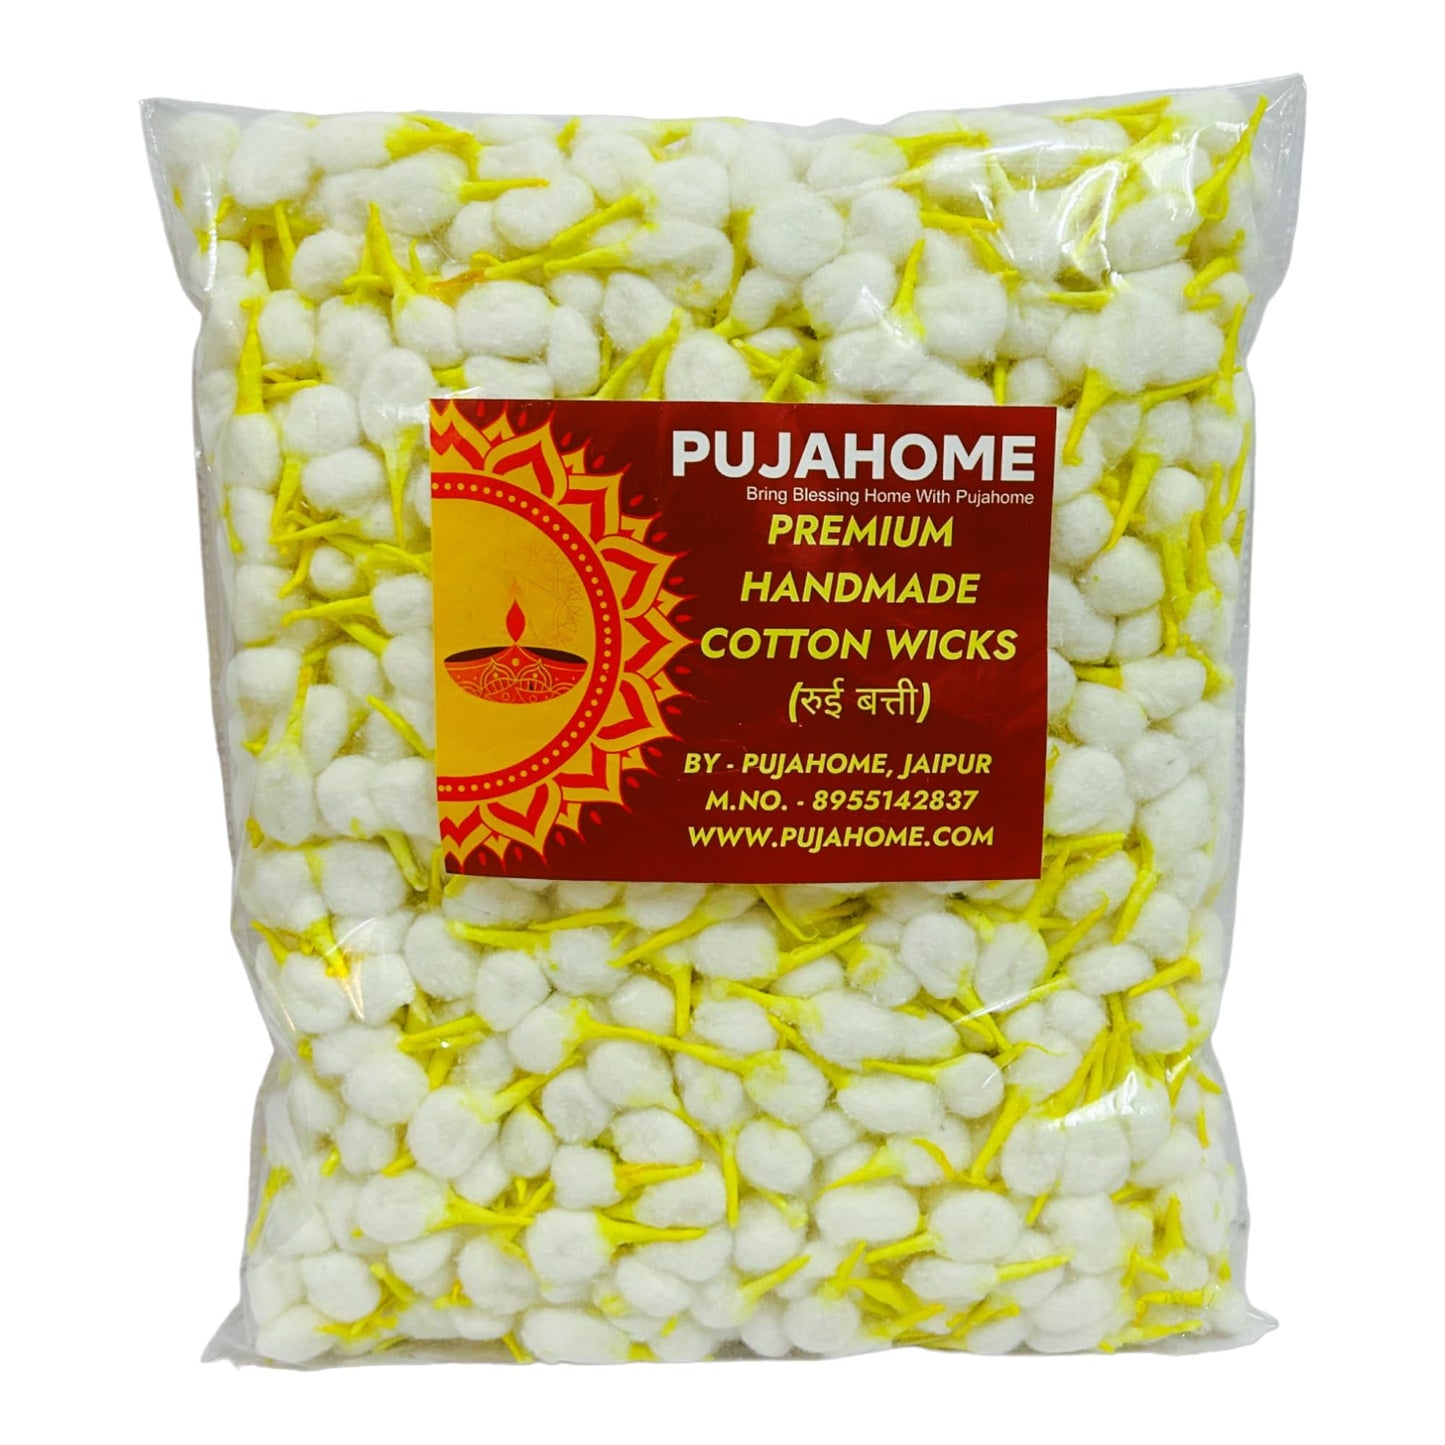 Pujahome Round Cotton Wicks for Diya, GOL Batti for Puja with Chandan Tip Pack of 2100 Pieces